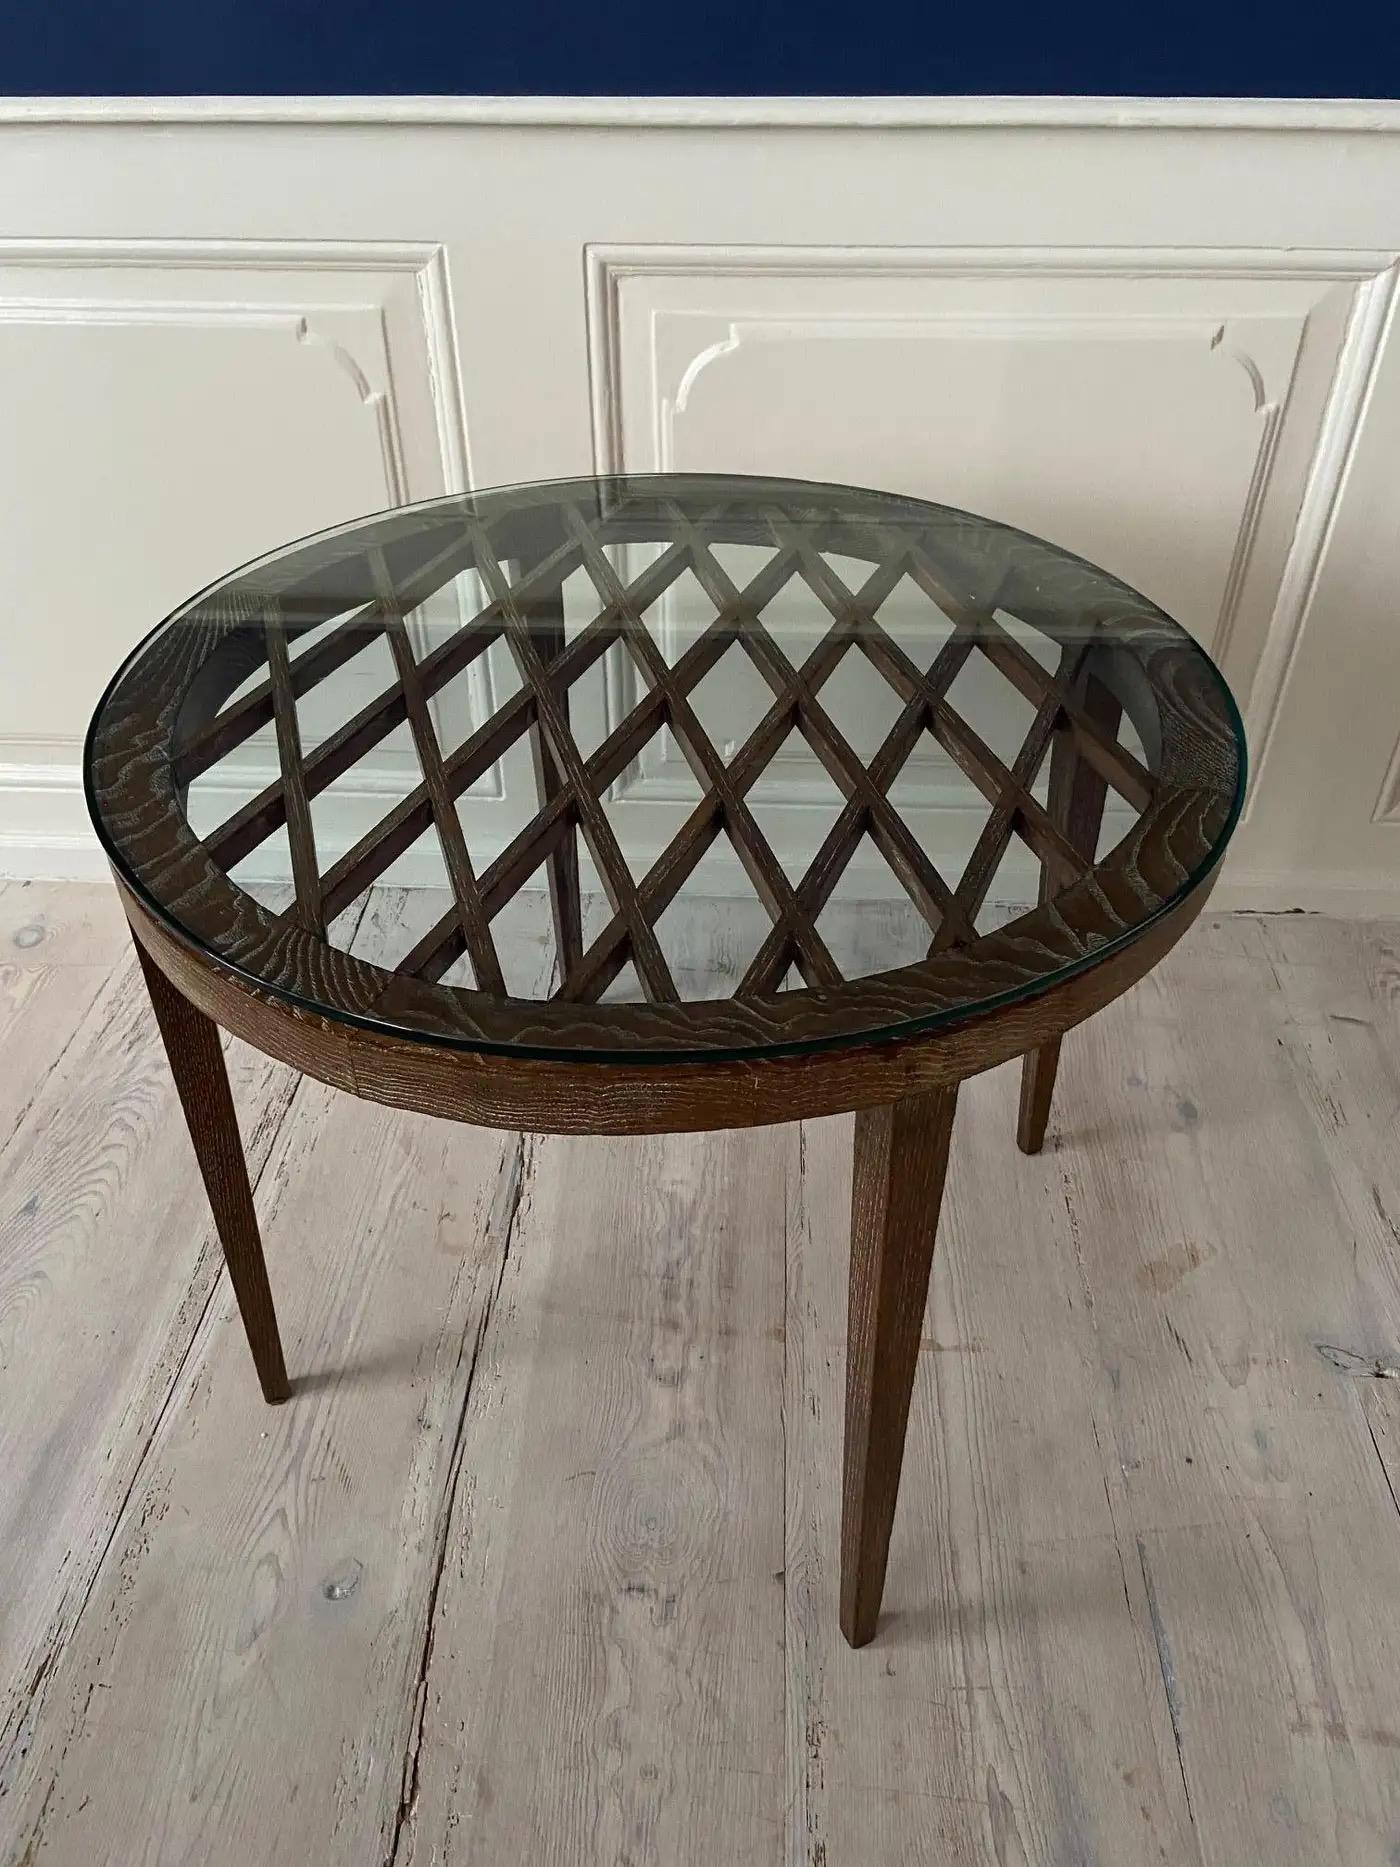 Italian Vintage Side Table in Wood and Glass Top with Decorative Details, Italy, 1950s For Sale